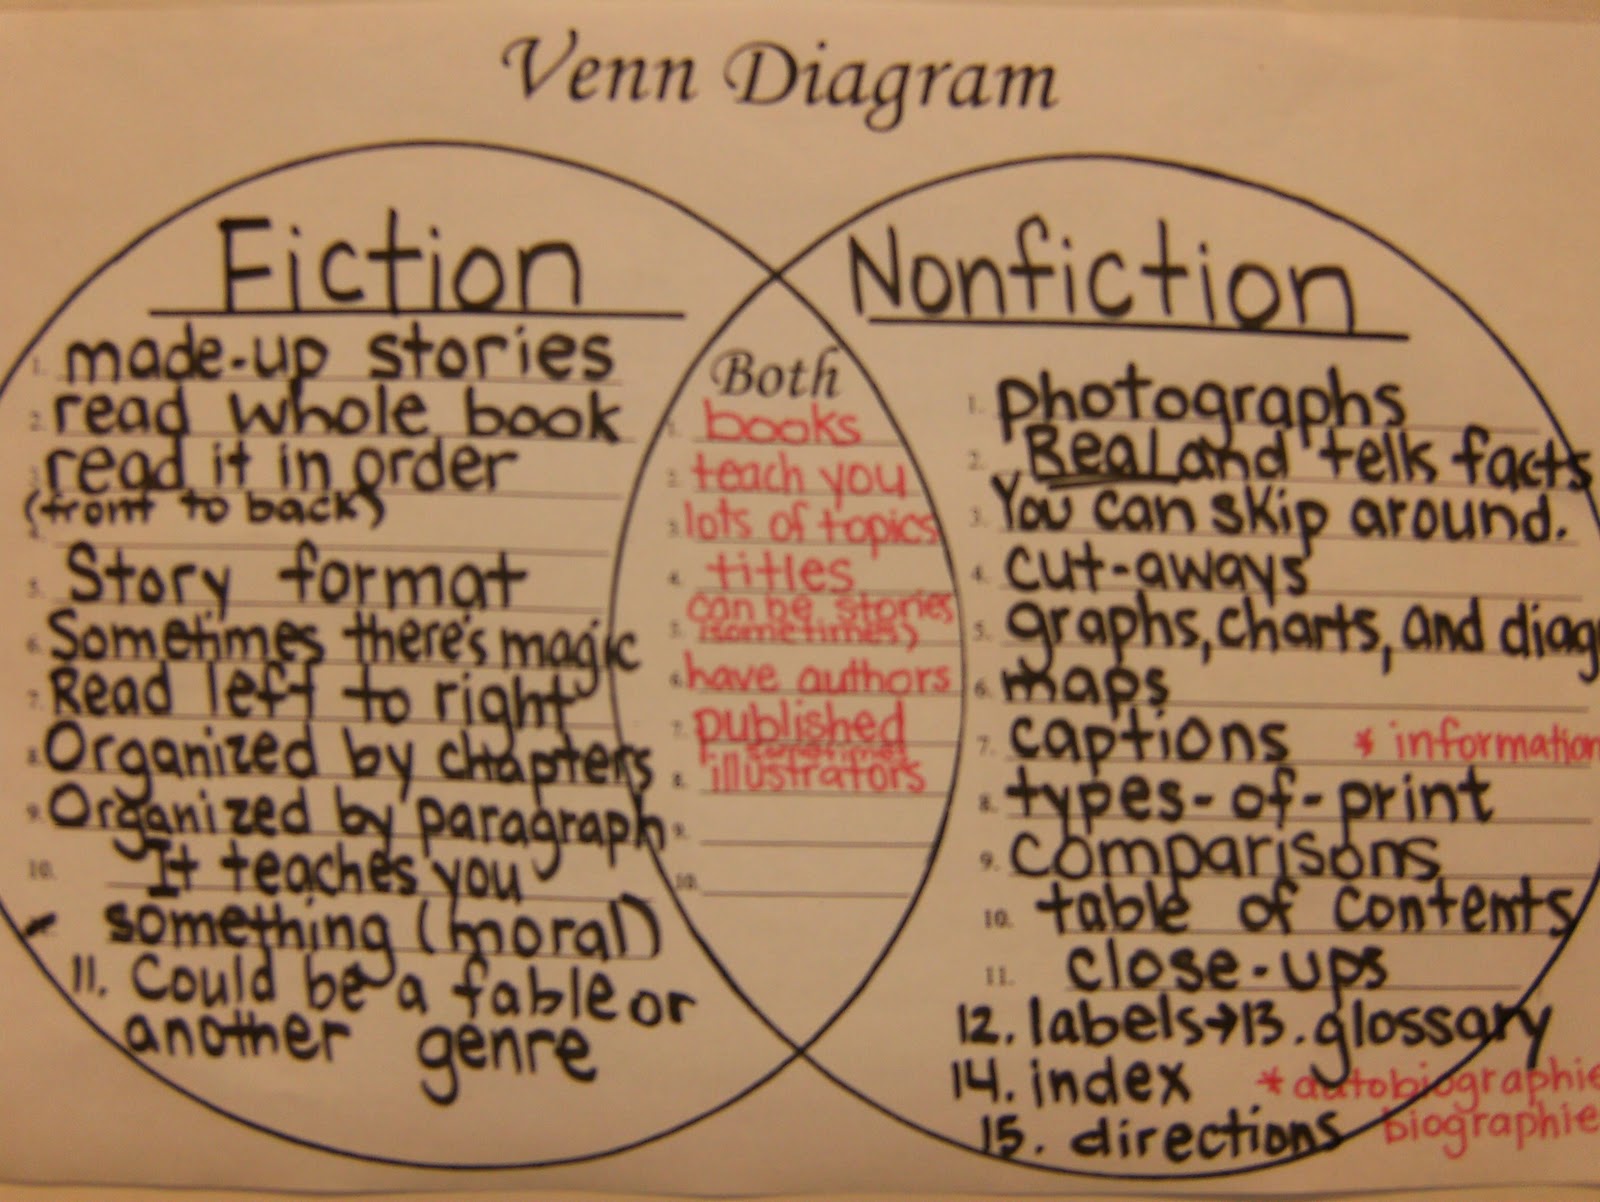 Nonfiction Conventions - One Extra Degree